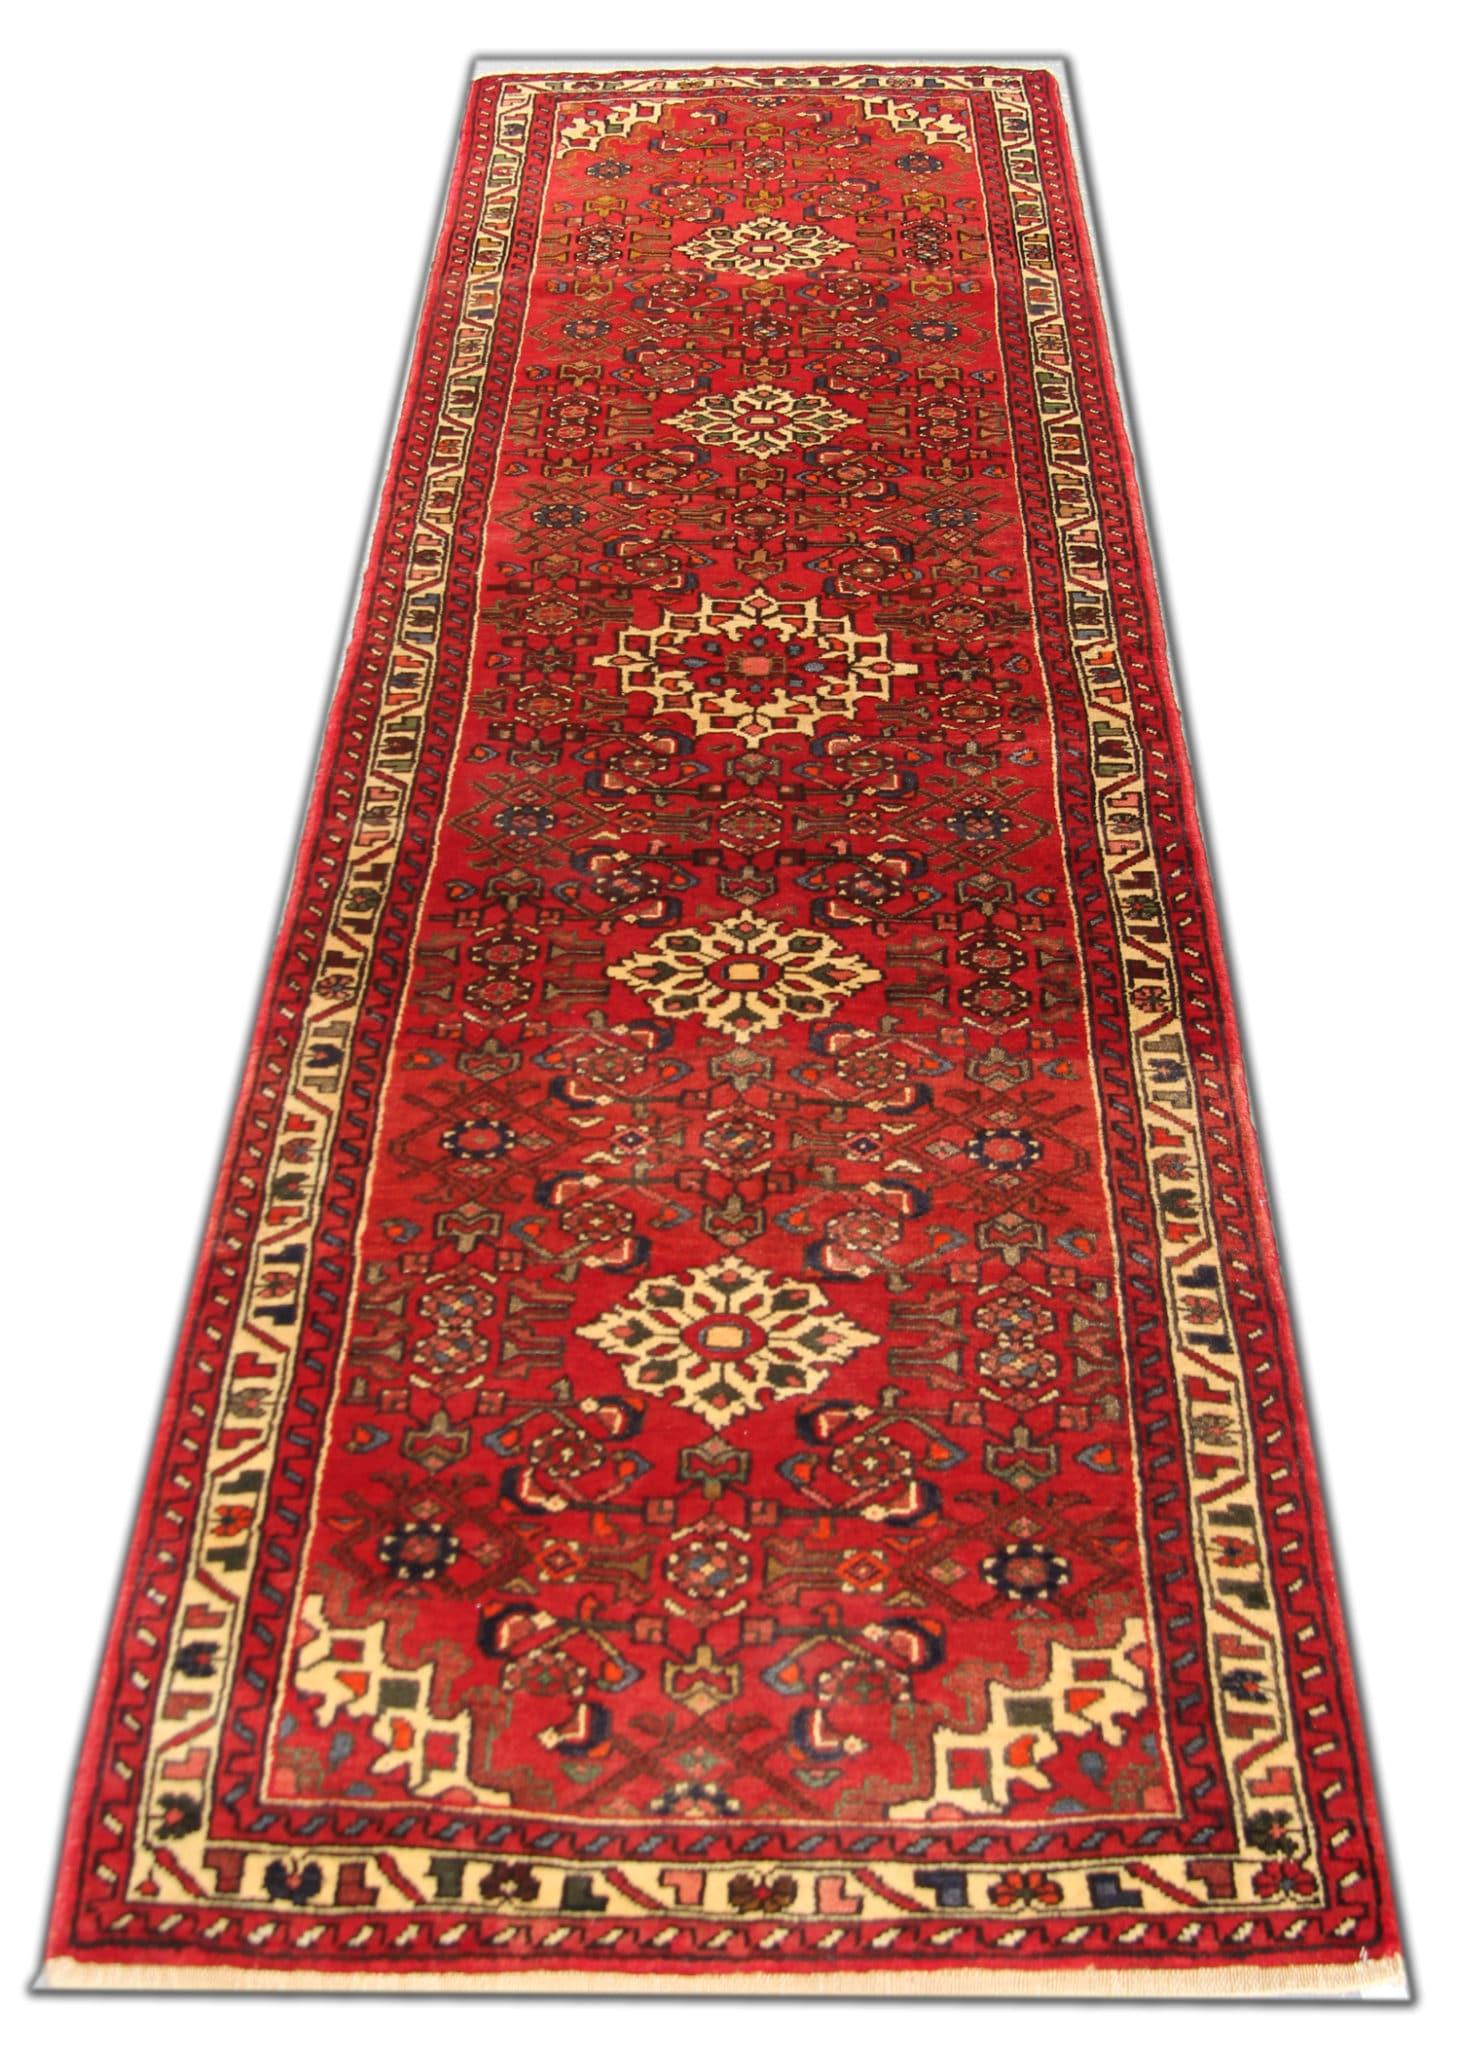 Vintage Oriental Runner Rug, Red Stair Runner, Wool Rug In Excellent Condition For Sale In Hampshire, GB